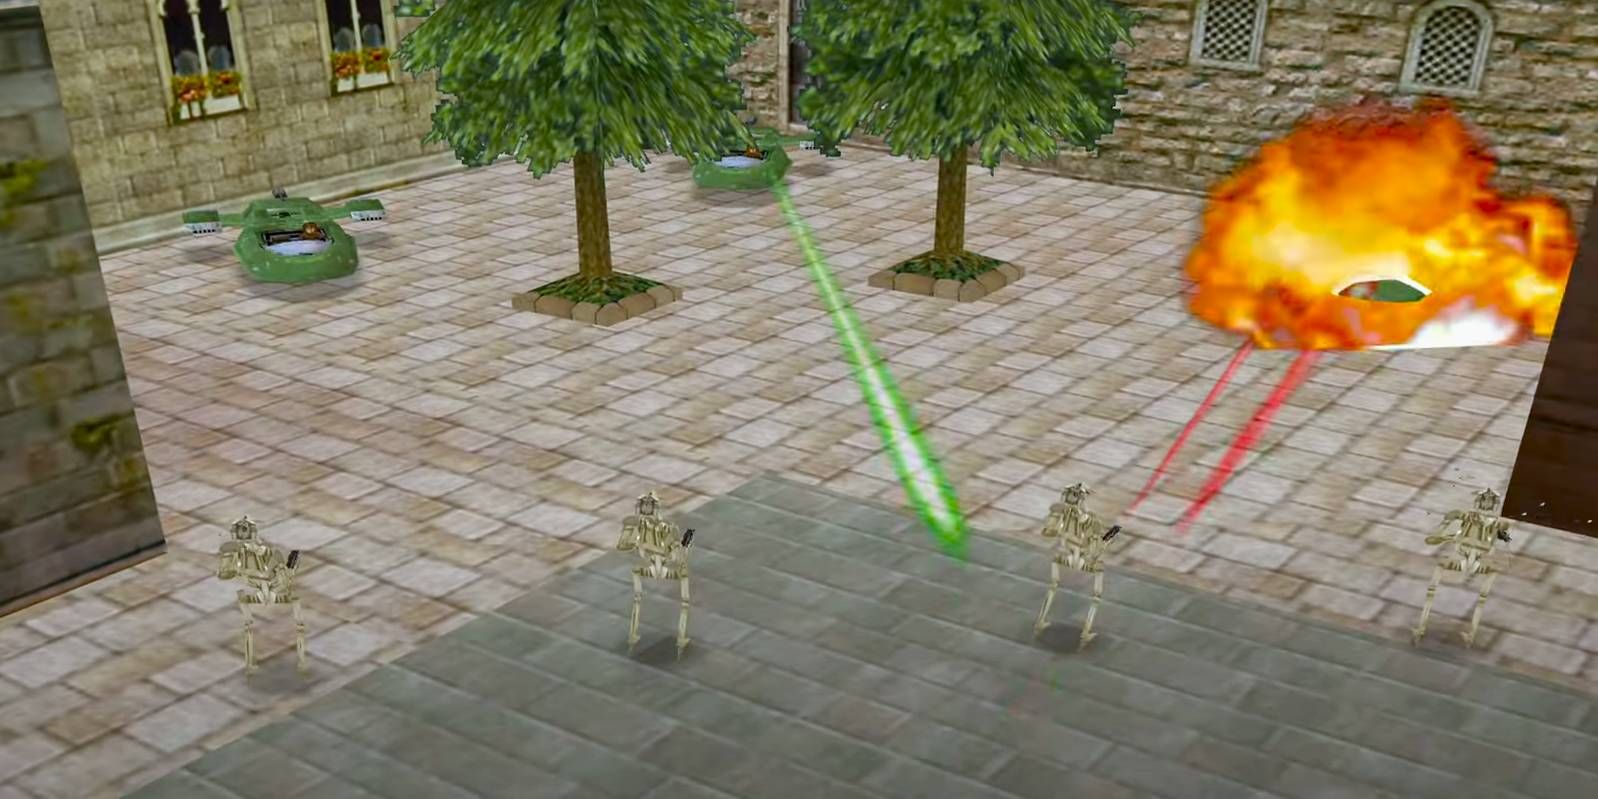 Battle droids attacking Flash Speeders in Star Wars Episode I Battle for Naboo